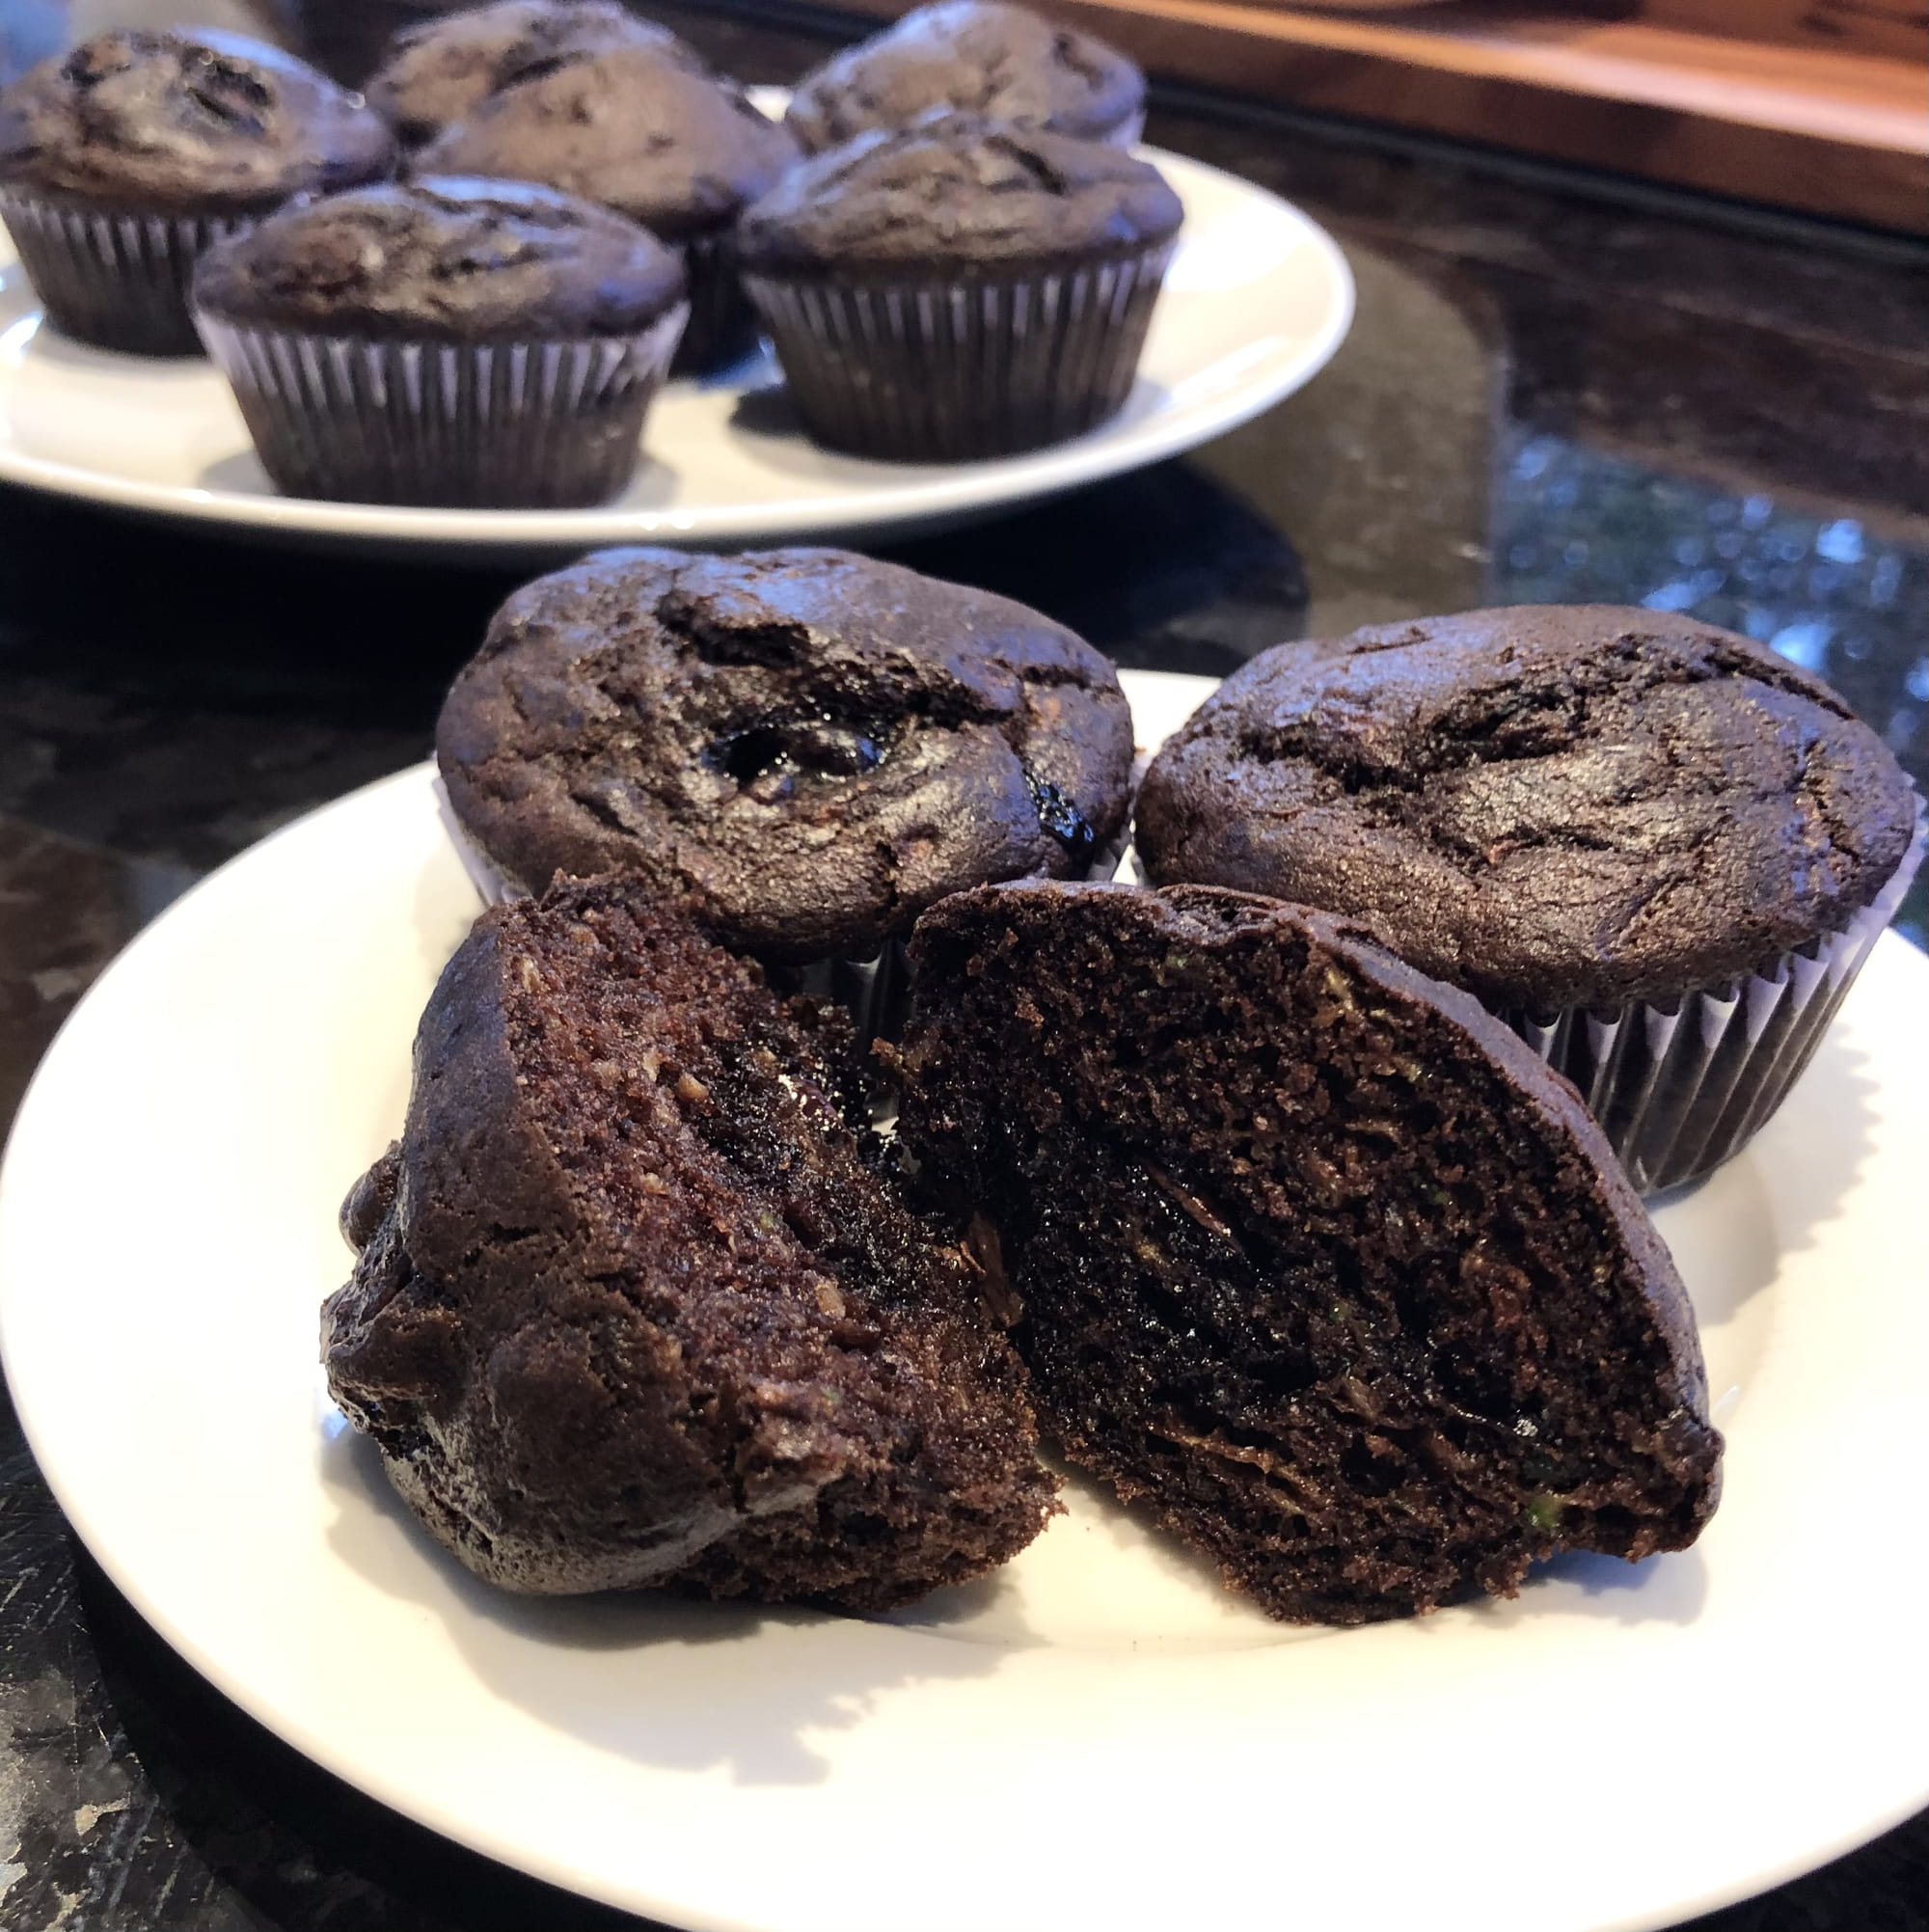 Smarter eating: adding fibre to chocolate muffins